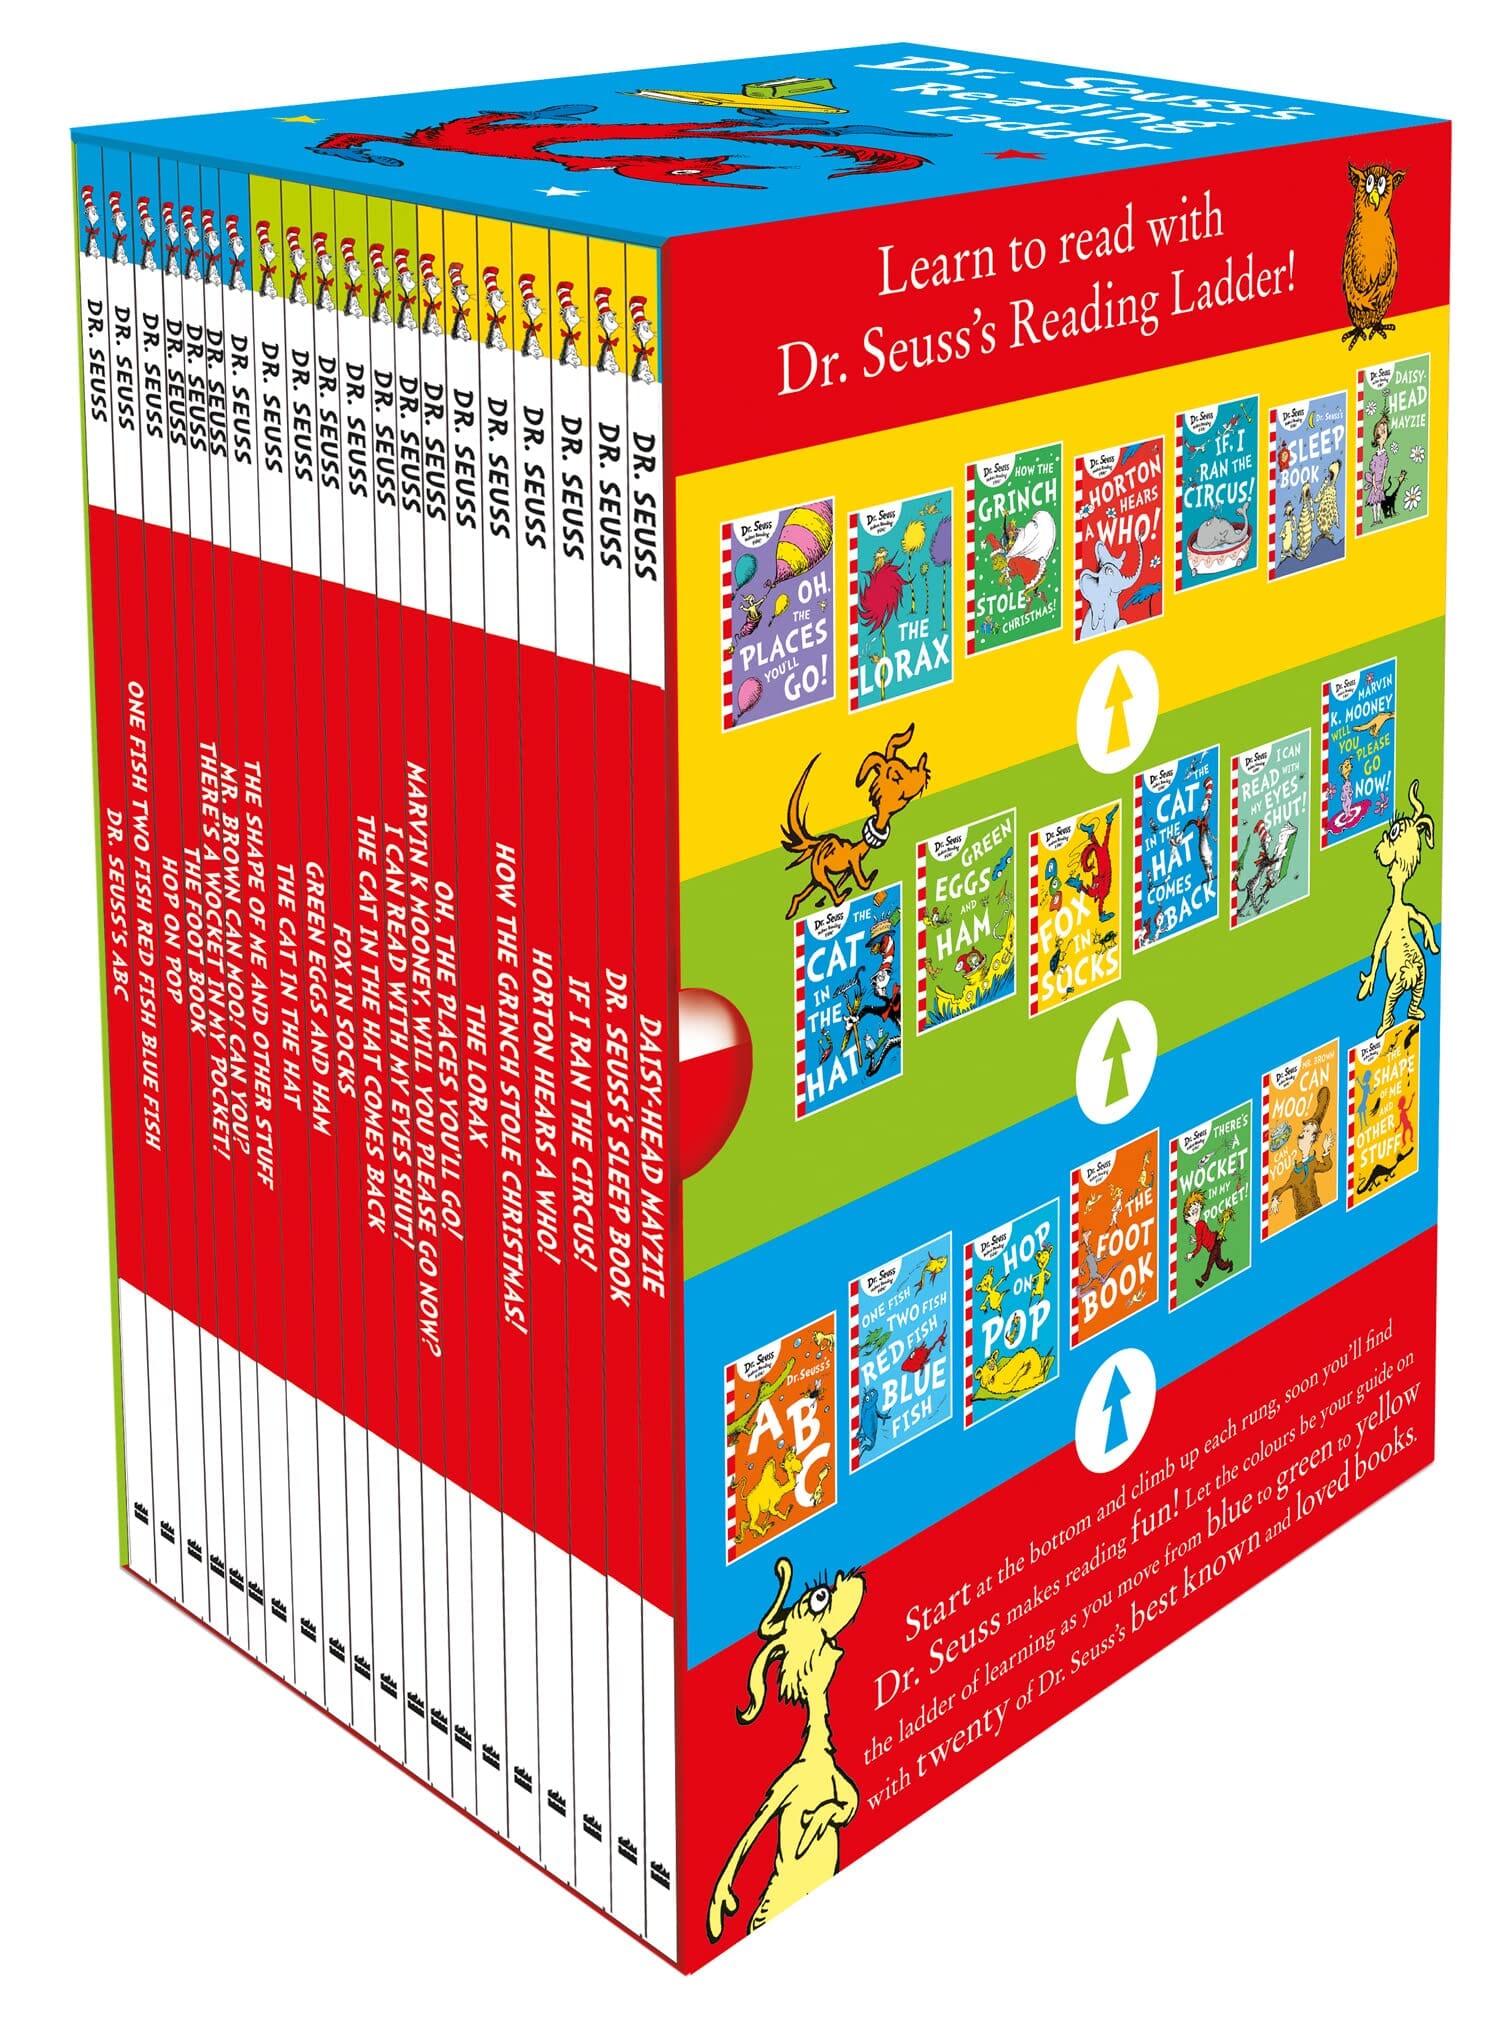 Dr. Seuss's Reading Ladder Learn To Read 20 Books Collection Box set - Age 3-7 - Paperback